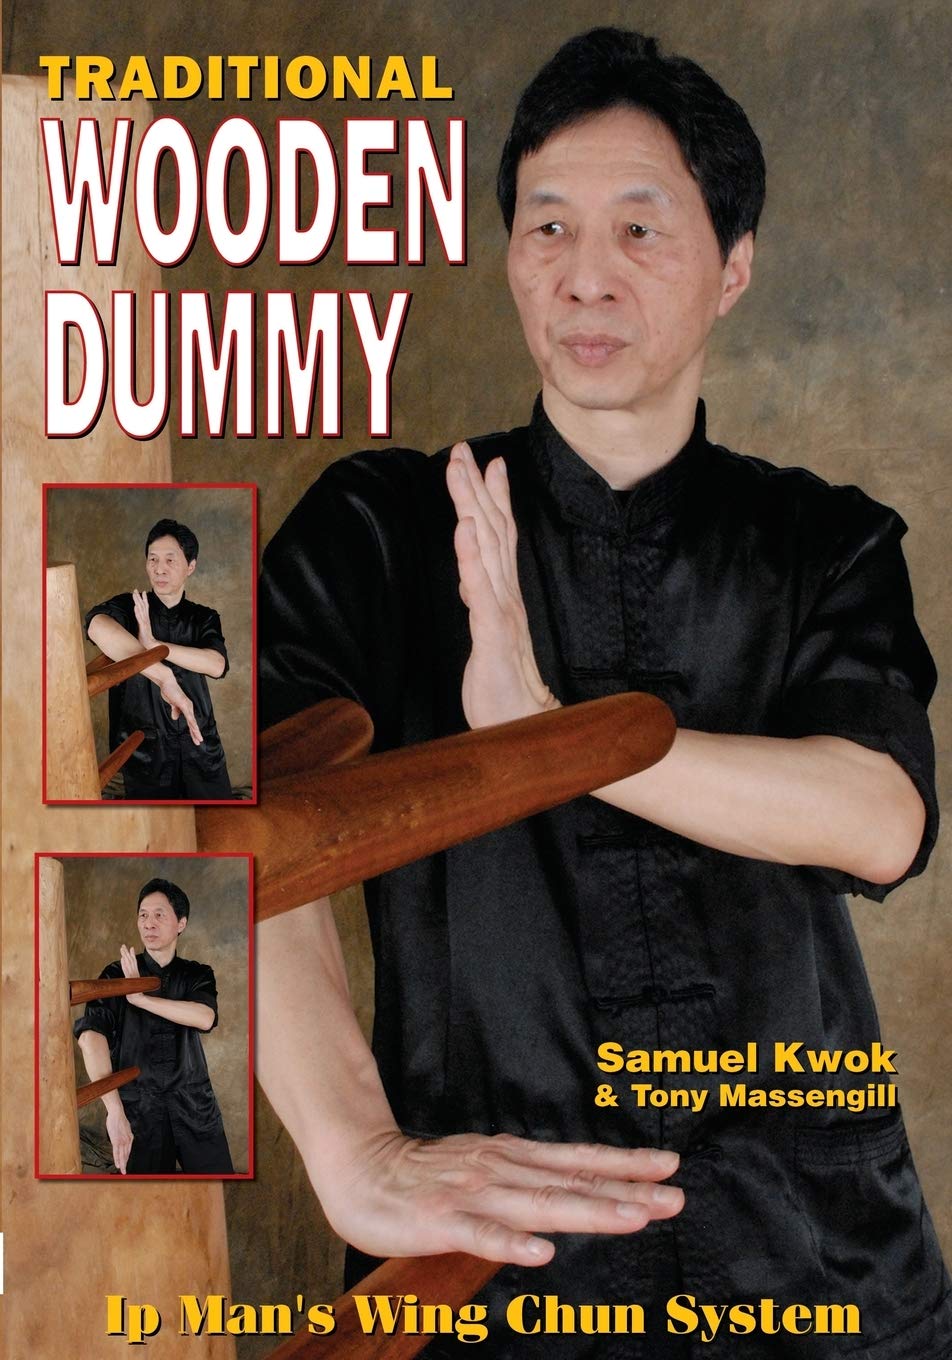 Wing Chun: Traditional Wooden Dummy Book by Samuel Kwok - Budovideos